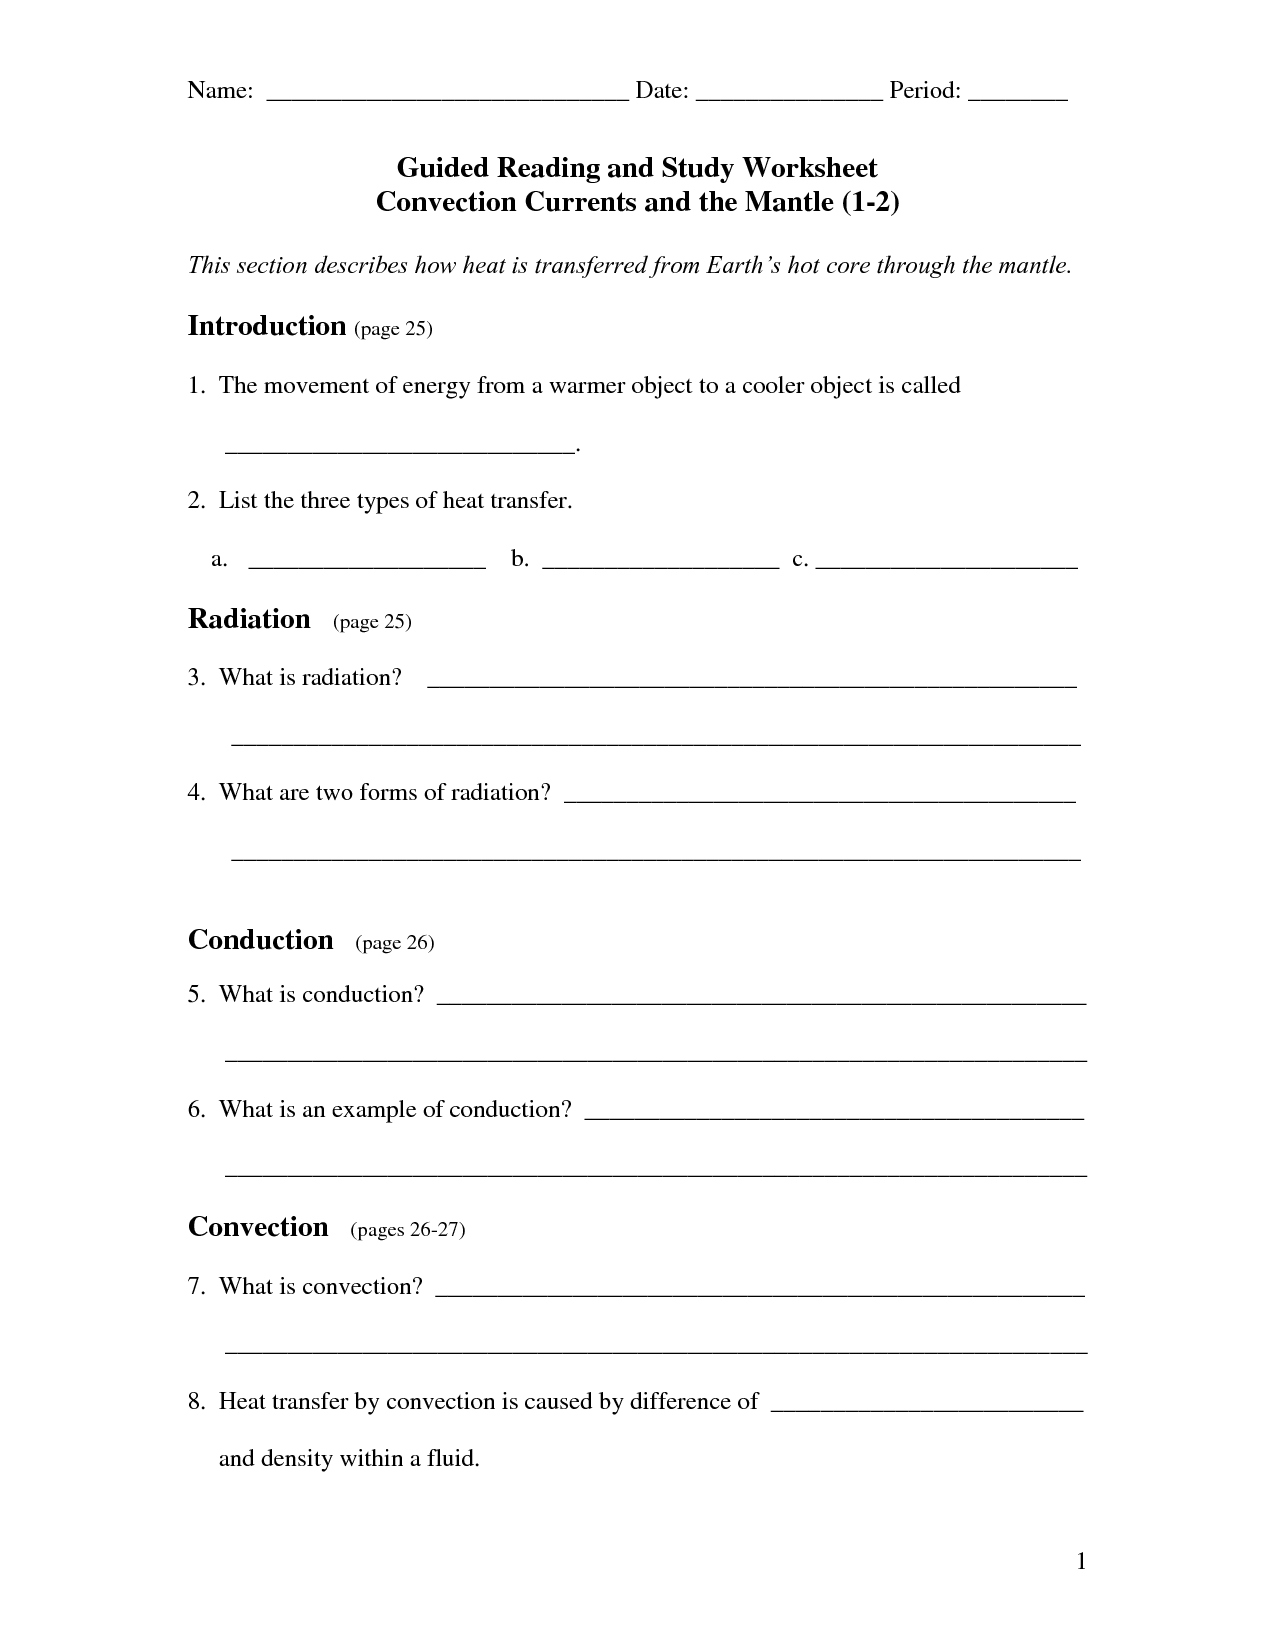 13 Best Images of Conduction Convection And Radiation Worksheet  Conduction Convection 